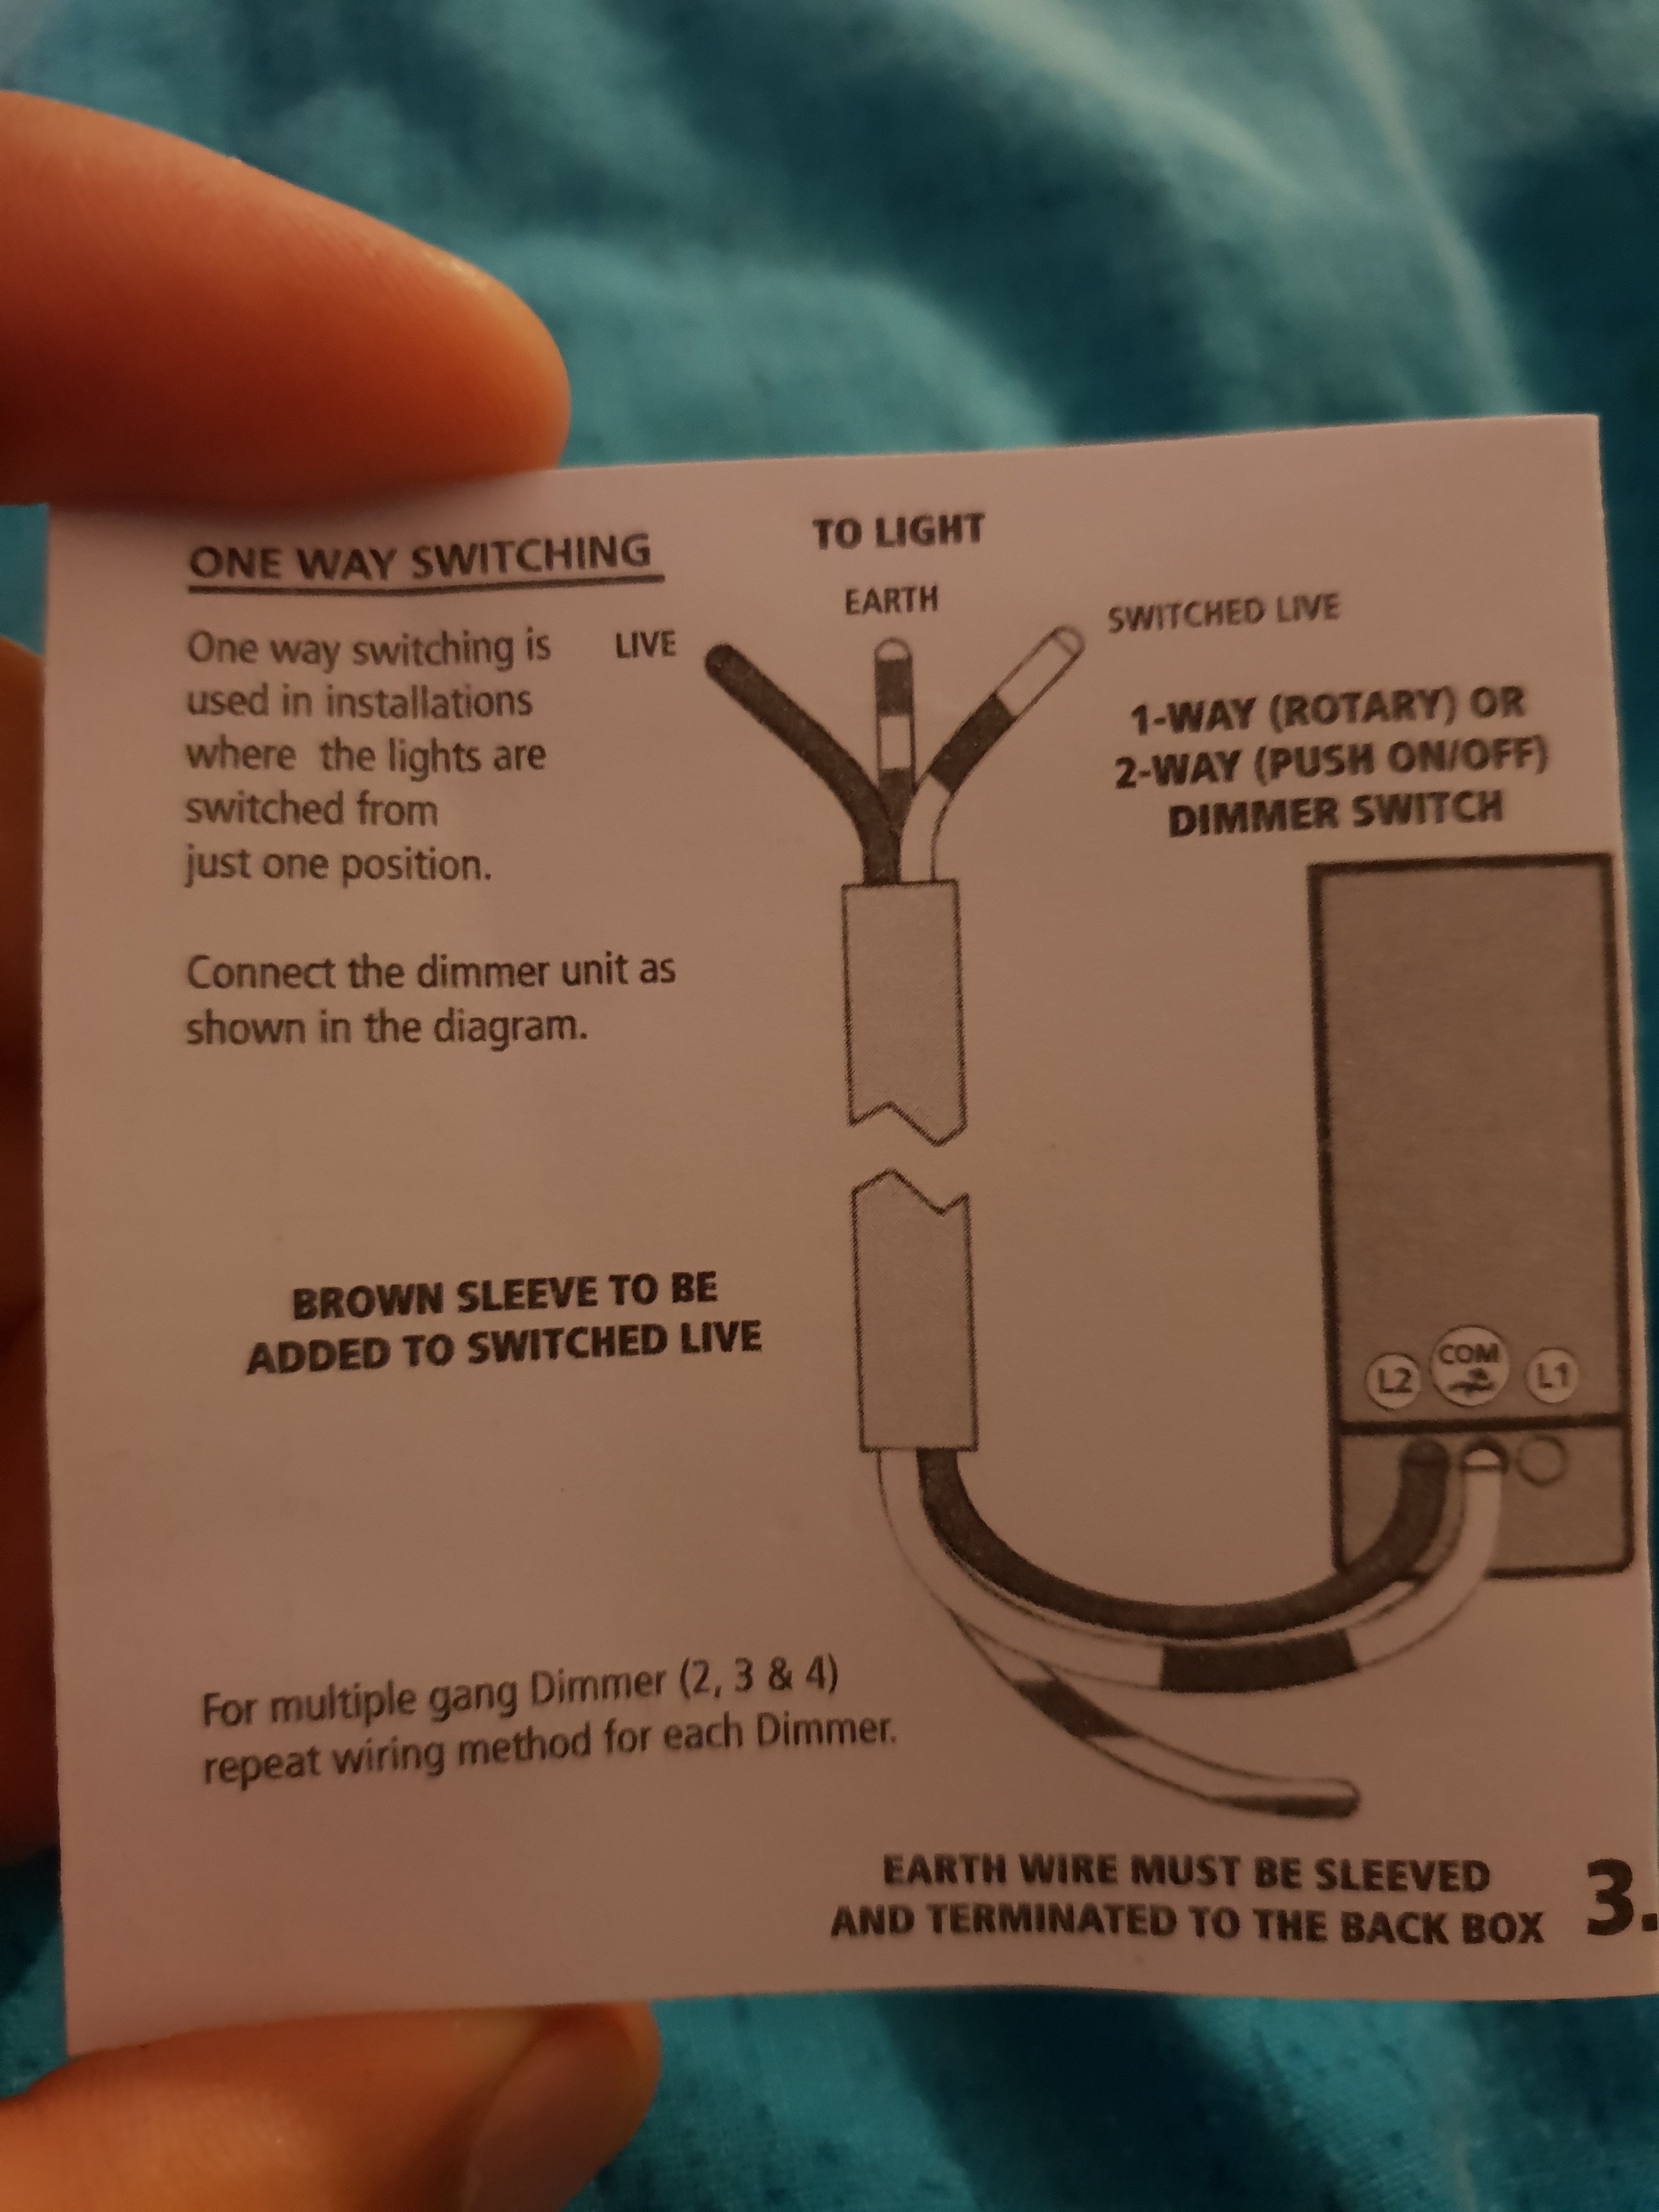 Newbie after advice how to install dimmer switch 20190104_202856 - EletriciansForums.net